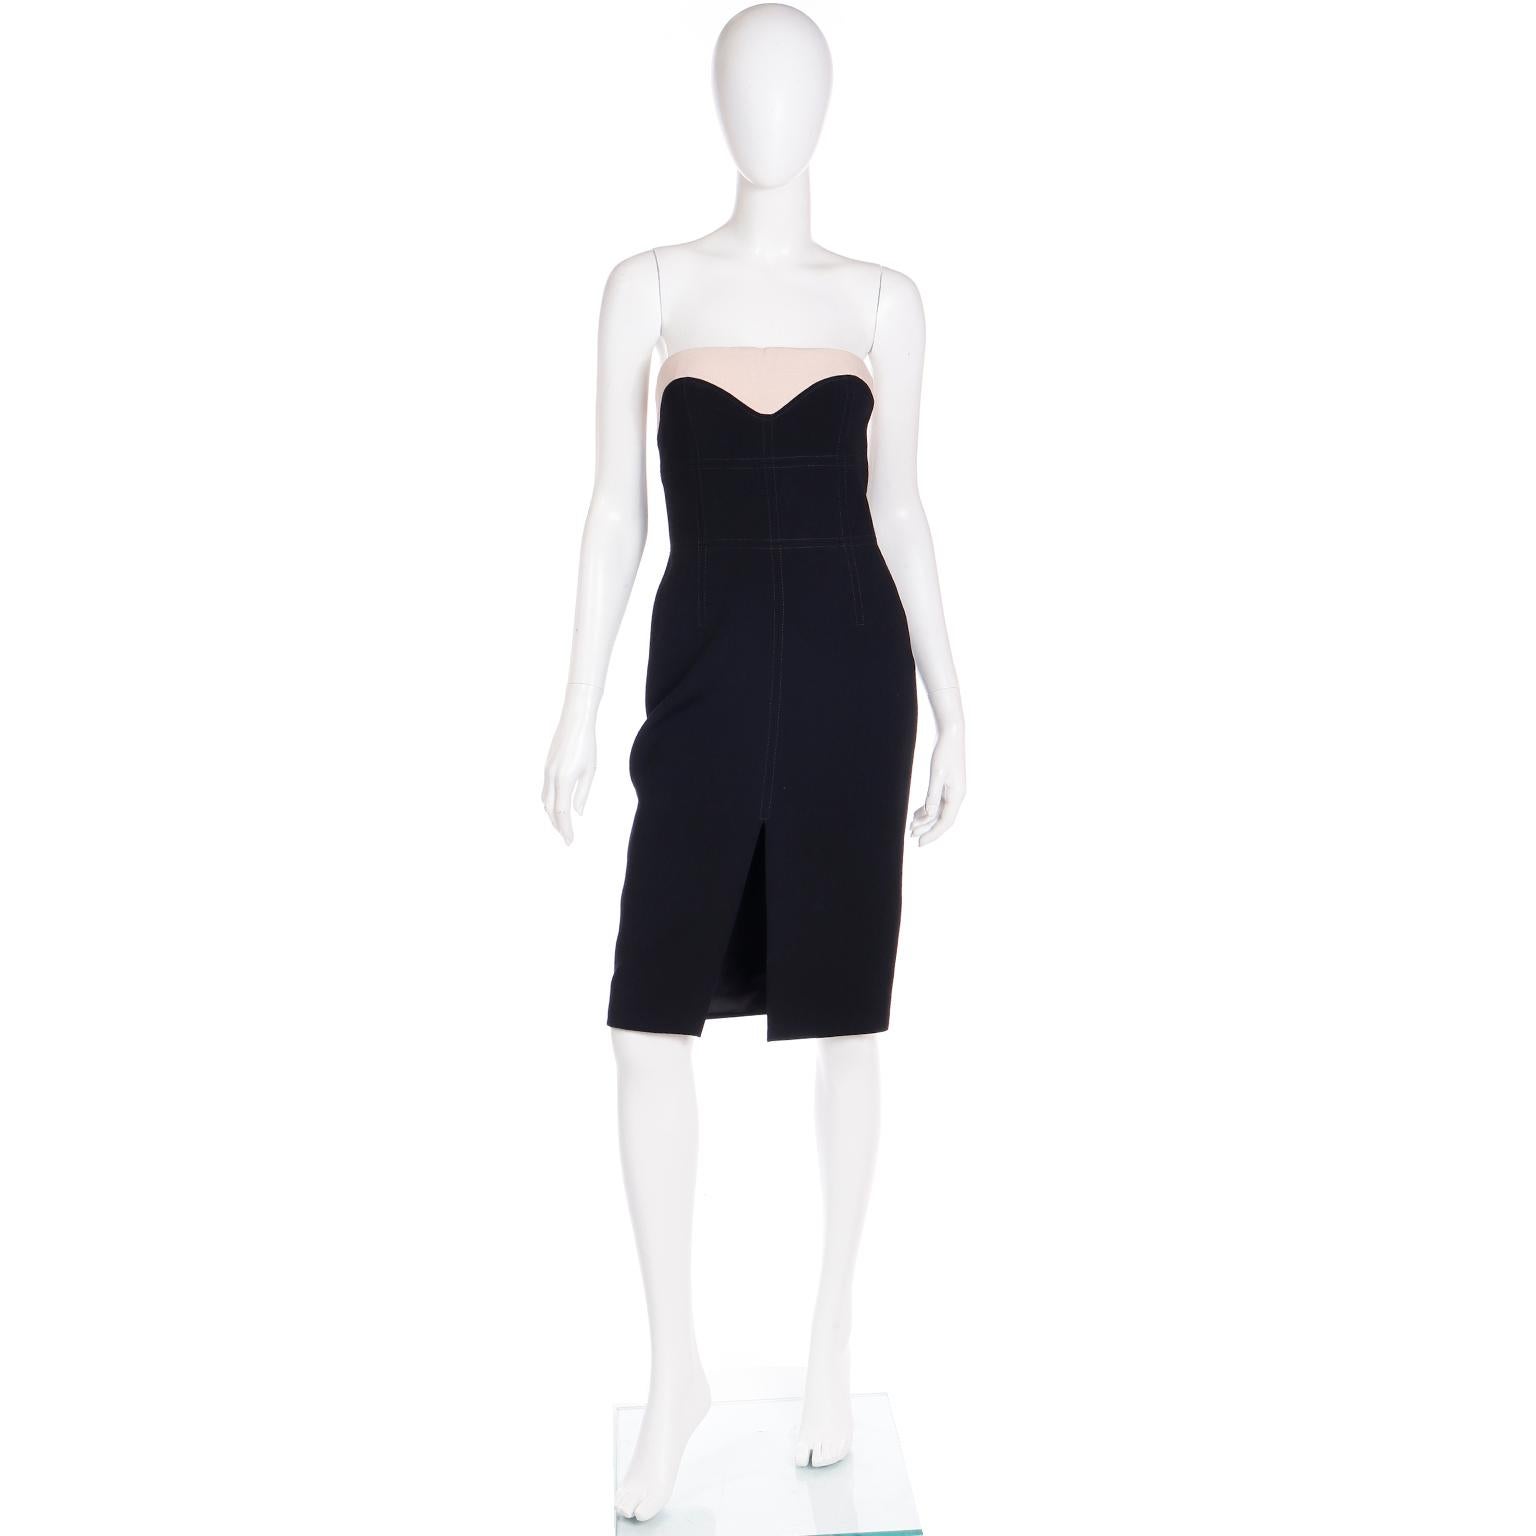 This Alexander McQueen black strapless dress would be a perfect little black dress to add to your wardrobe. The top of the dress has a 2'' Band of pink tinted beige the dramatic sweetheart neckline. The black fabric has a grid of top stitching